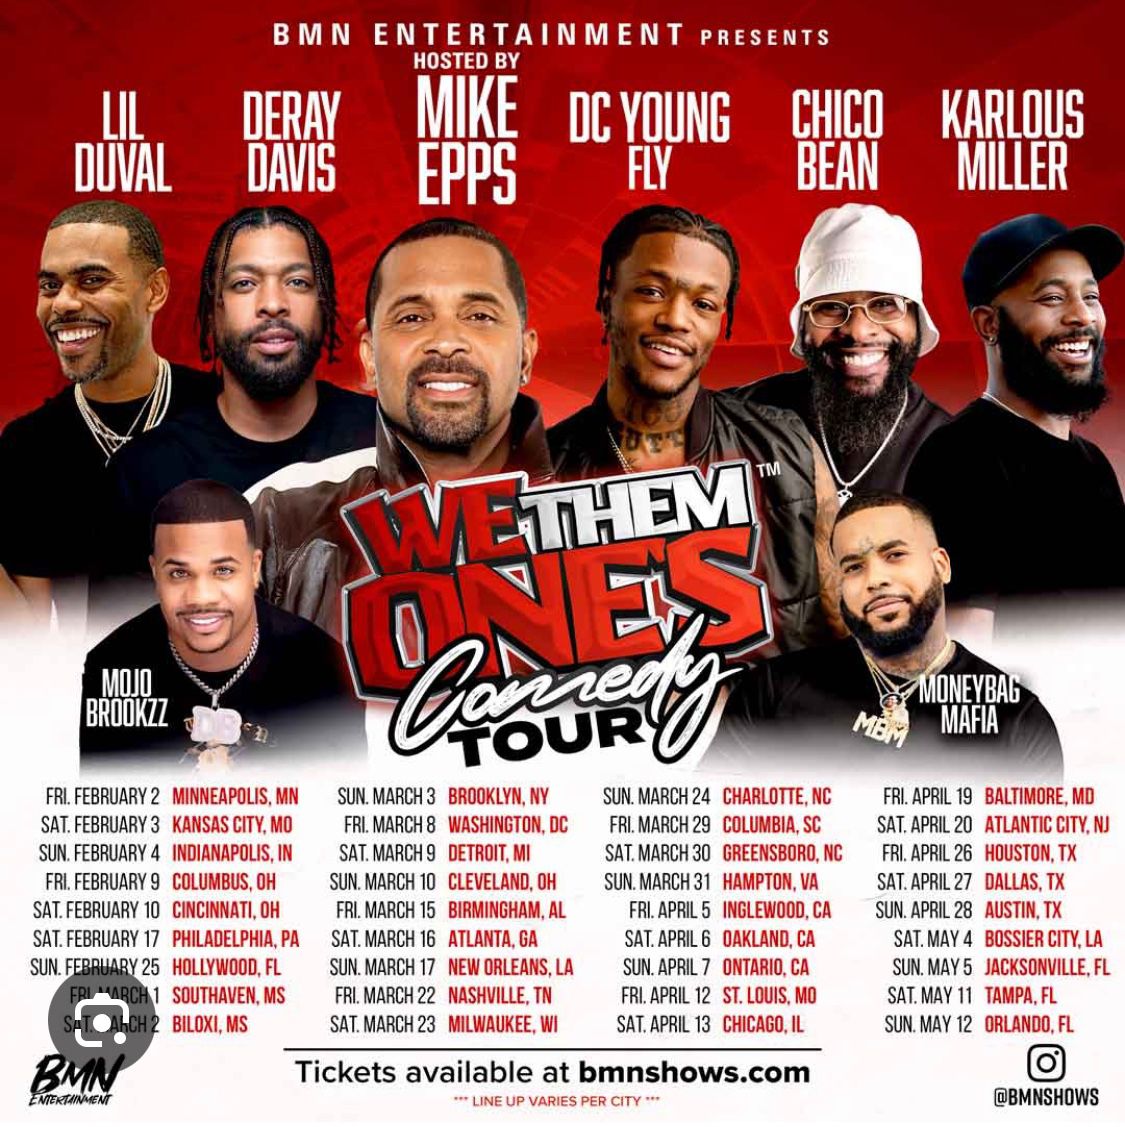 We Them Ones Comedy Tour Row 8 Seat 10 ONLY ONE SEAT